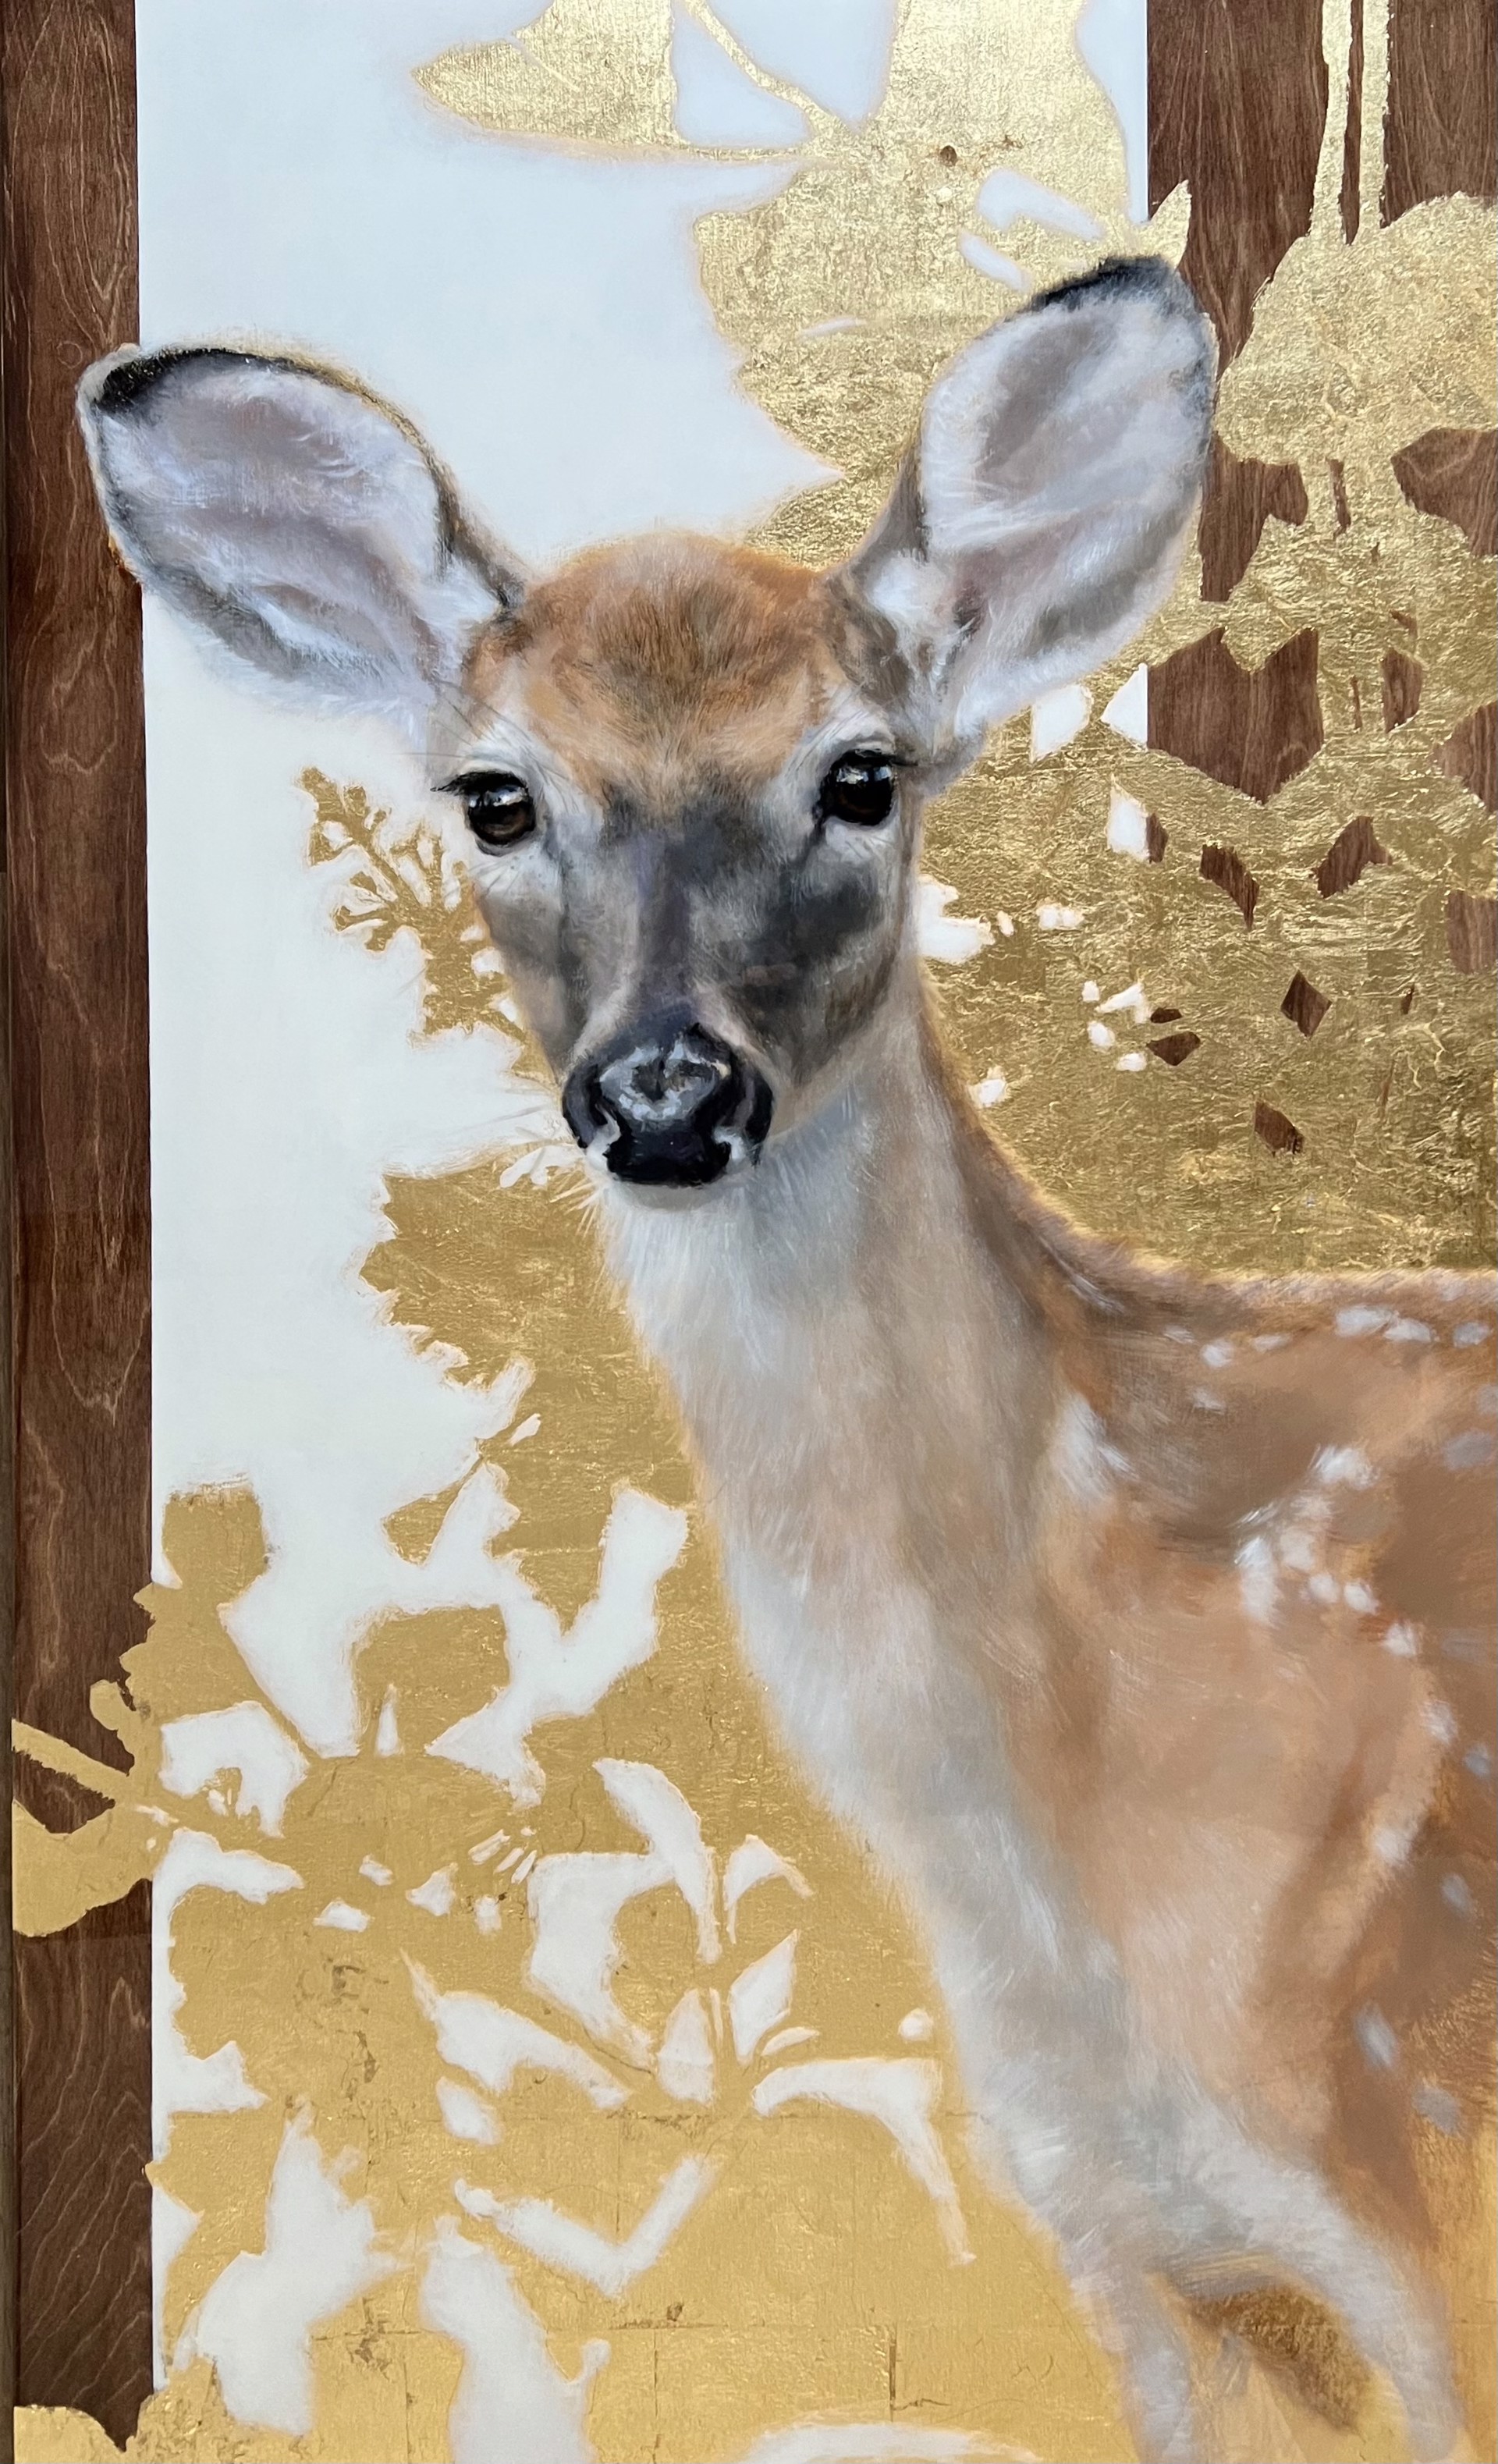 Acrylic painting of a deer fawn by Nealy Riley